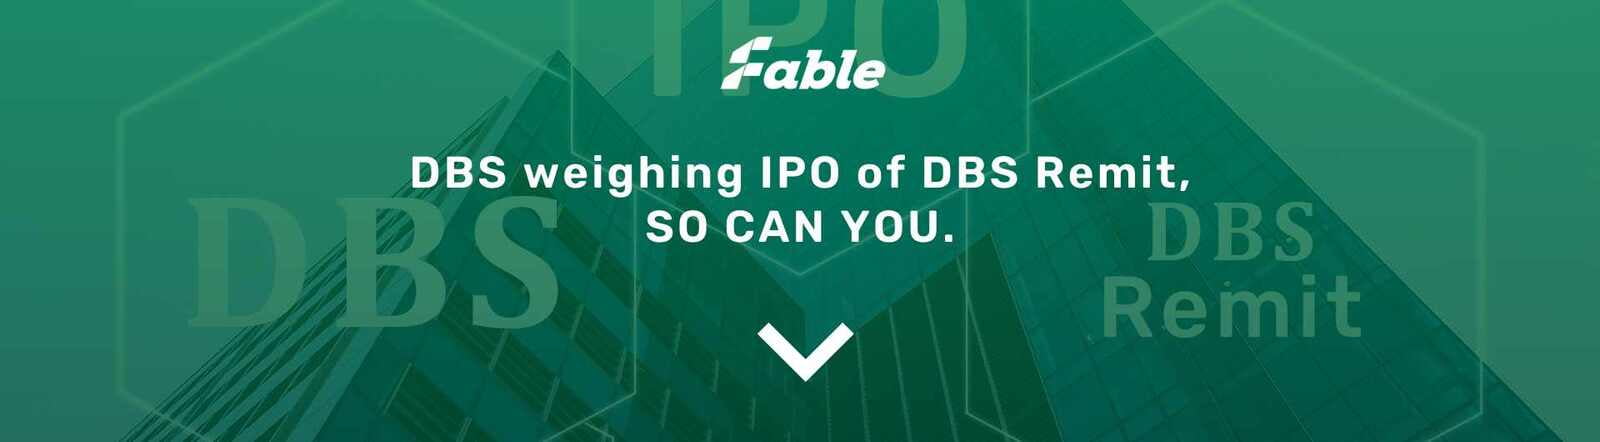 DBS weighing IPO of DBS Remit, SO CAN YOU!